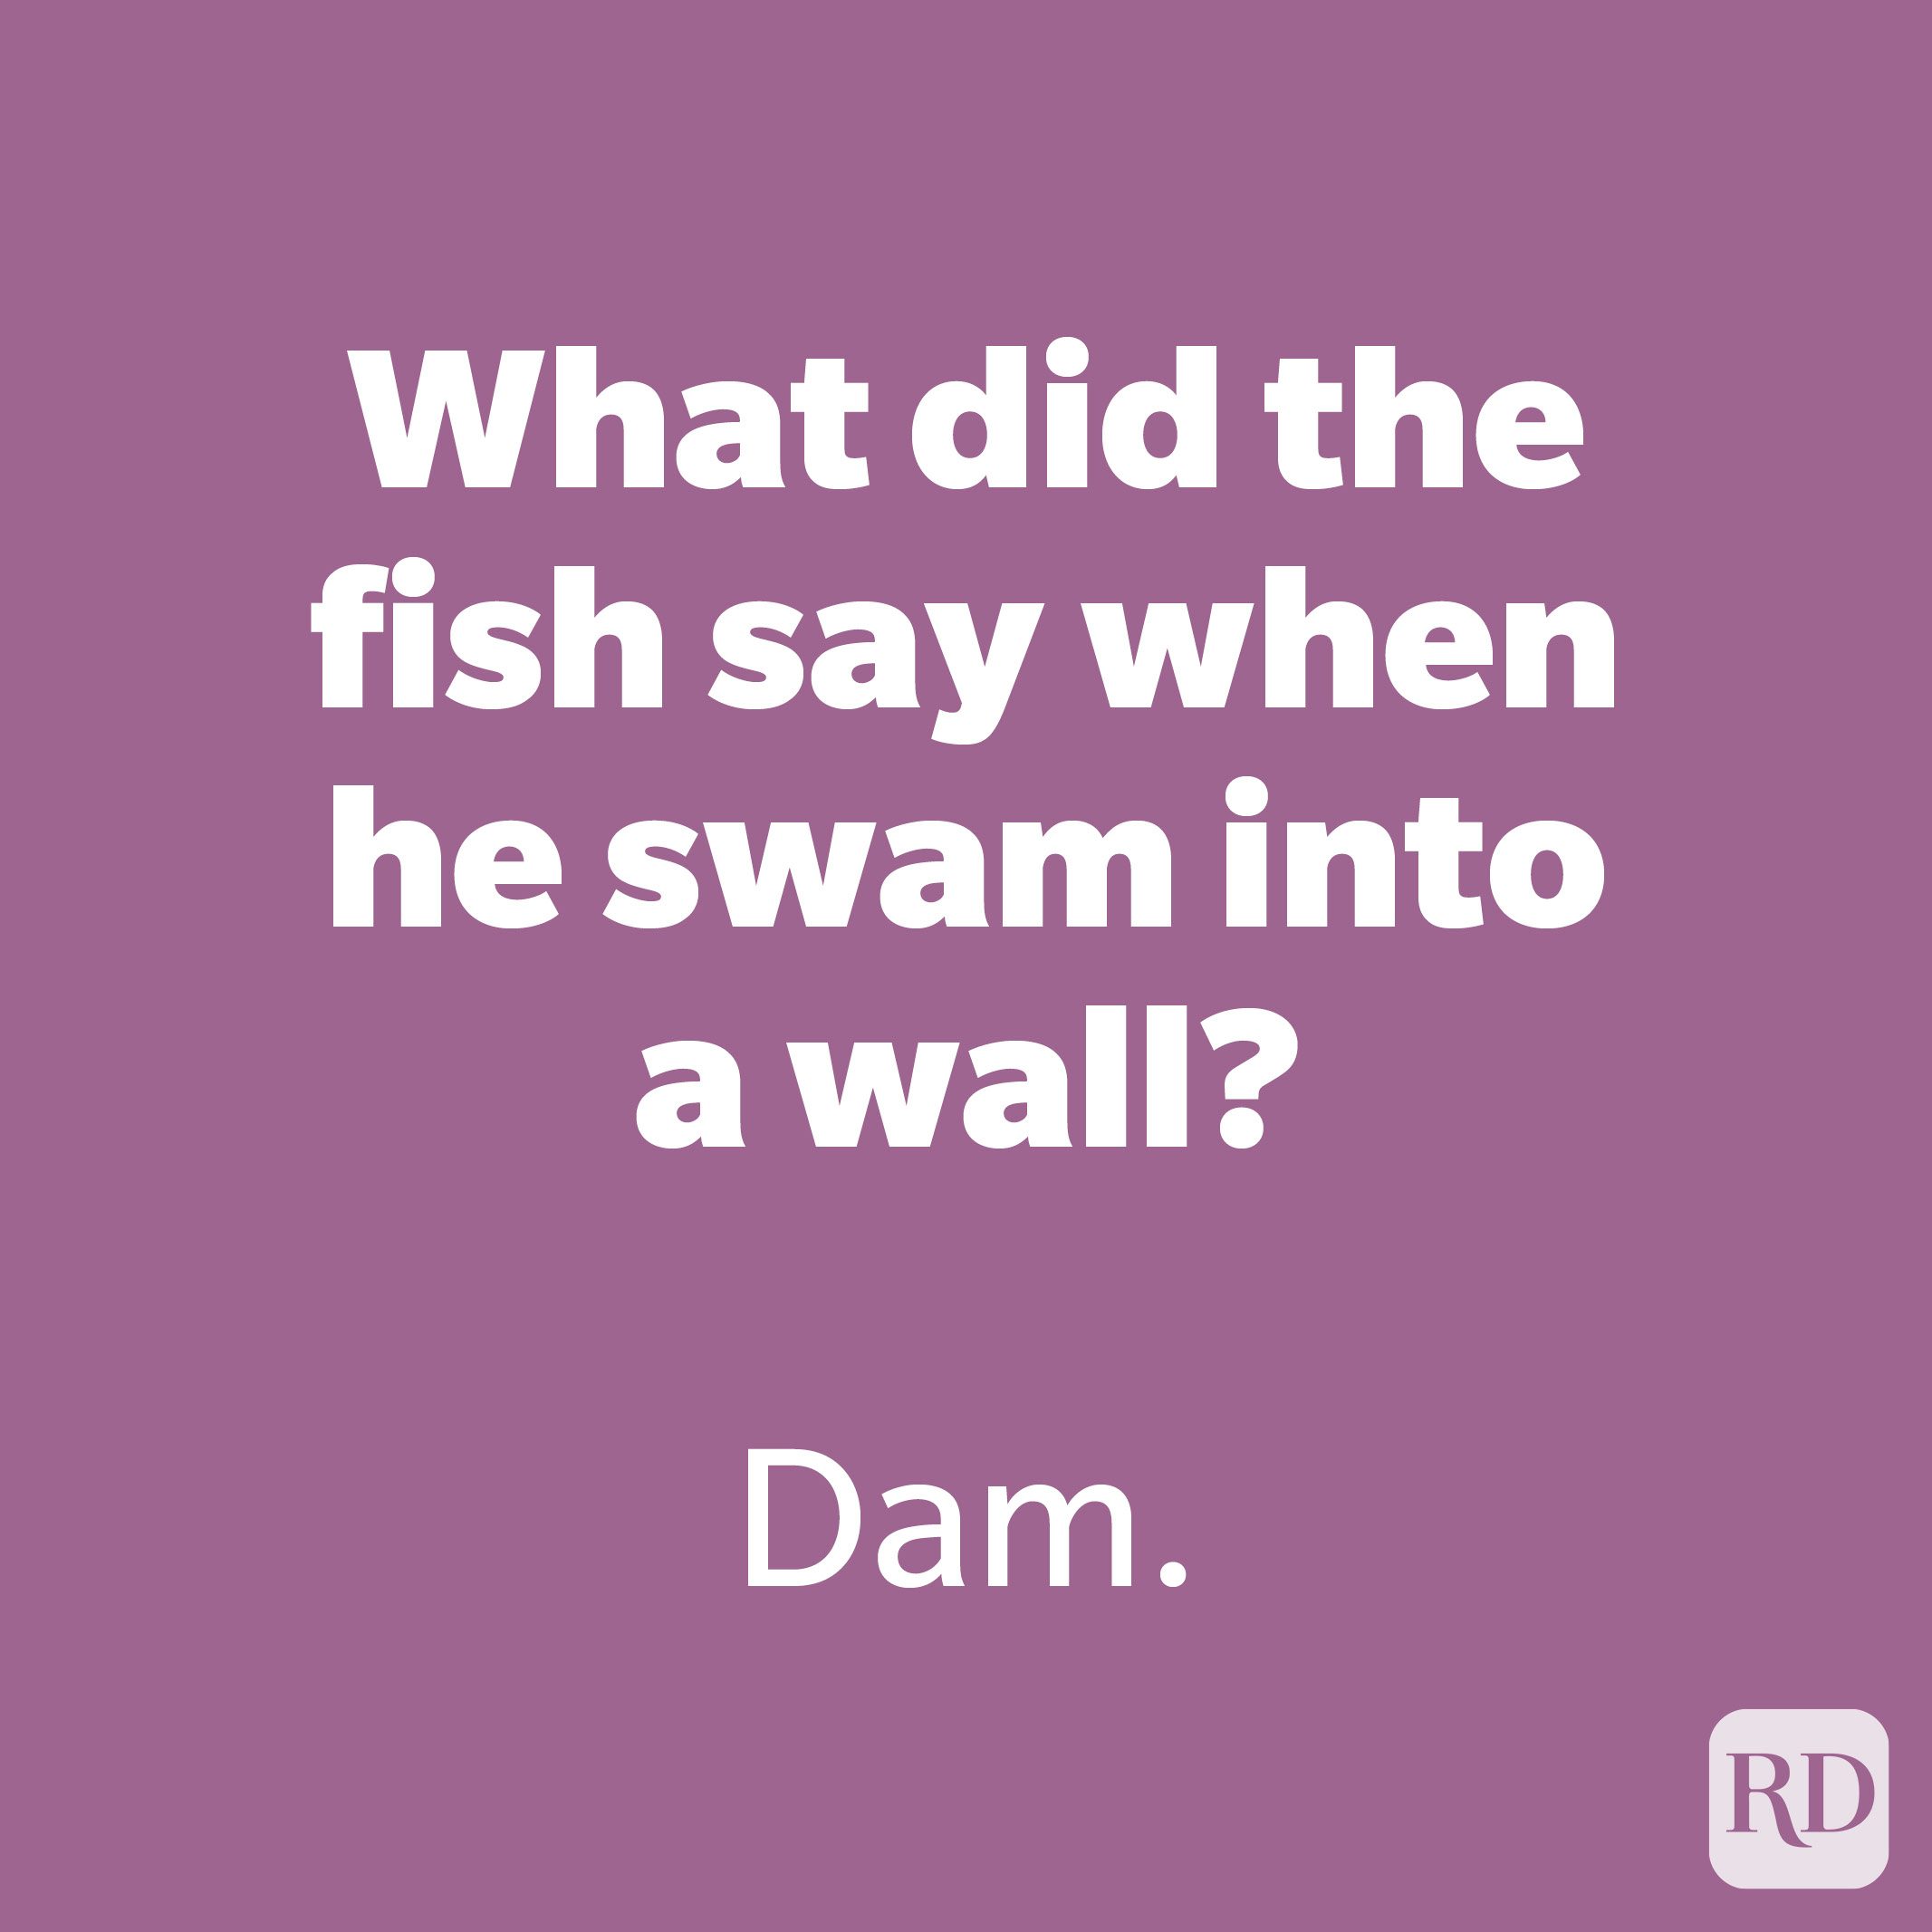 175 Bad Jokes That You Can't But Laugh | Reader's Digest